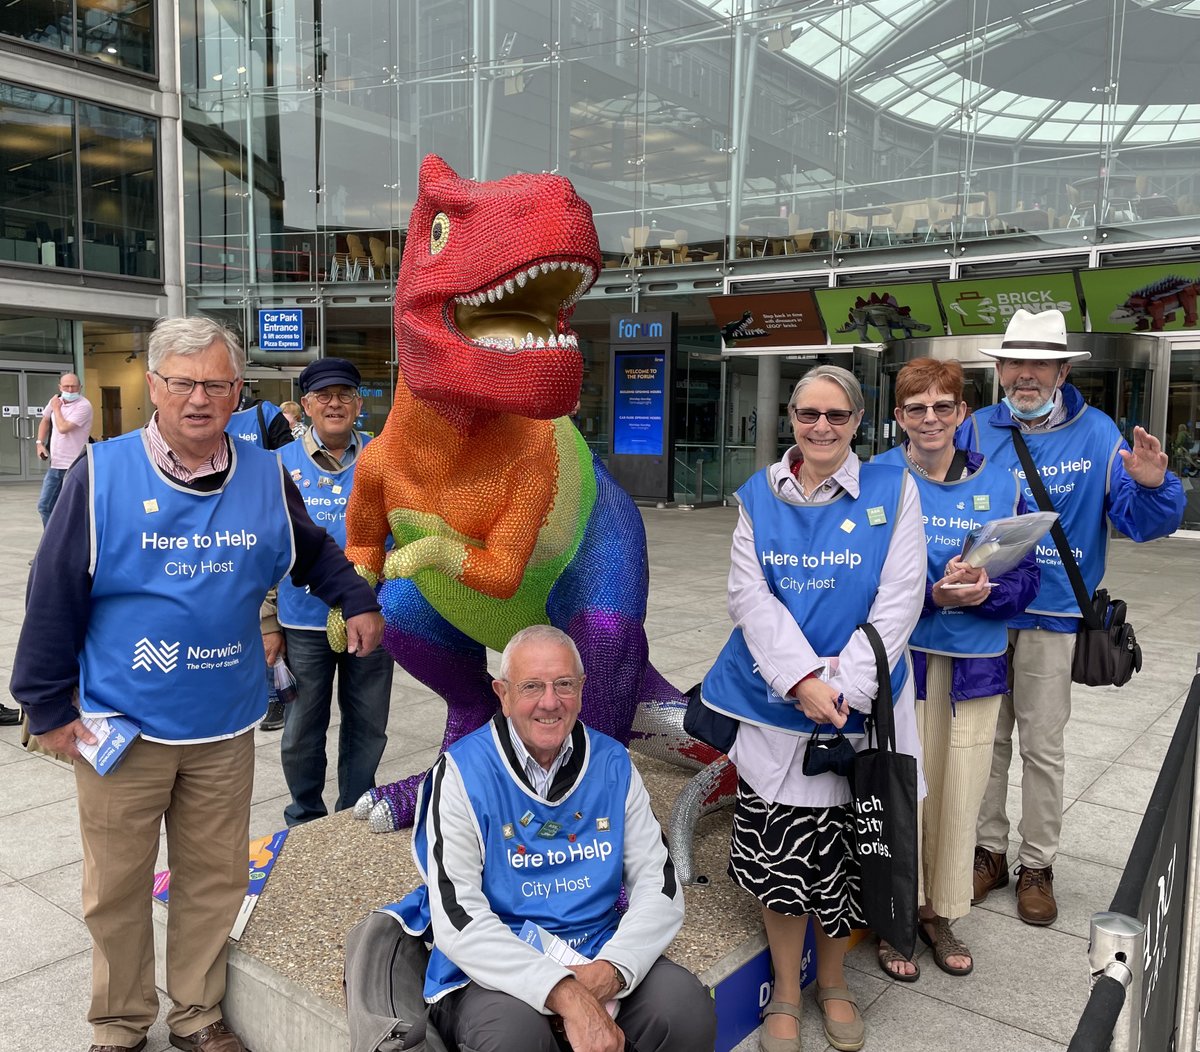 Hope you are having as much fun as we are with the dinosaurs #GoGoDiscover #summerfun #cityhosts #directions #information or just say 👋
@VisitNorwich @NorwichBIDUK @GoGoDiscover21 @TheForumNorwich